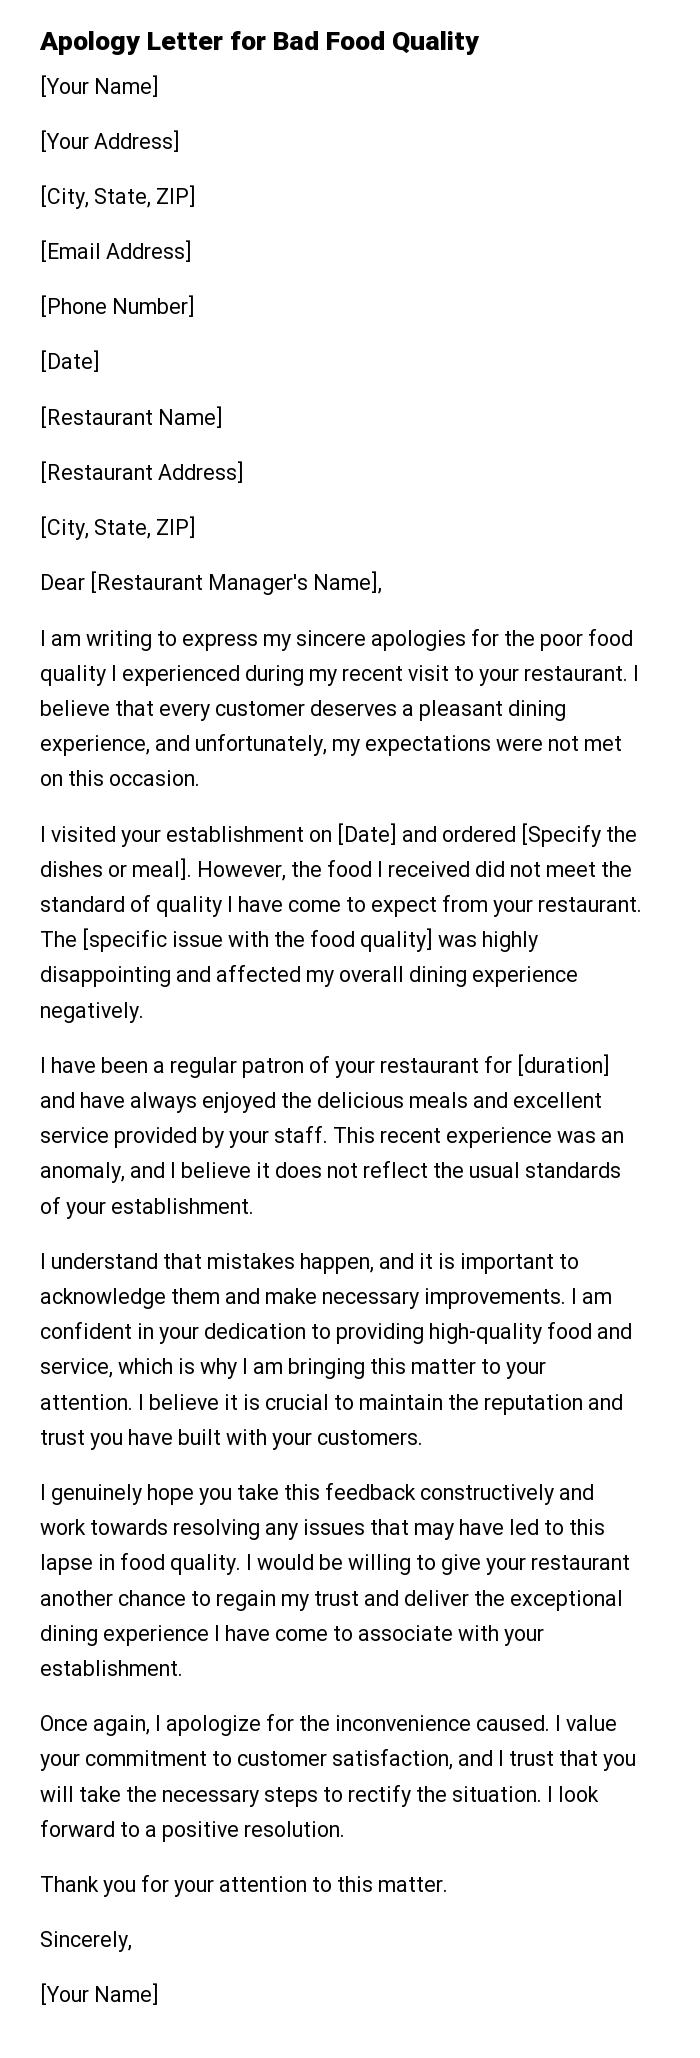 Apology Letter for Bad Food Quality